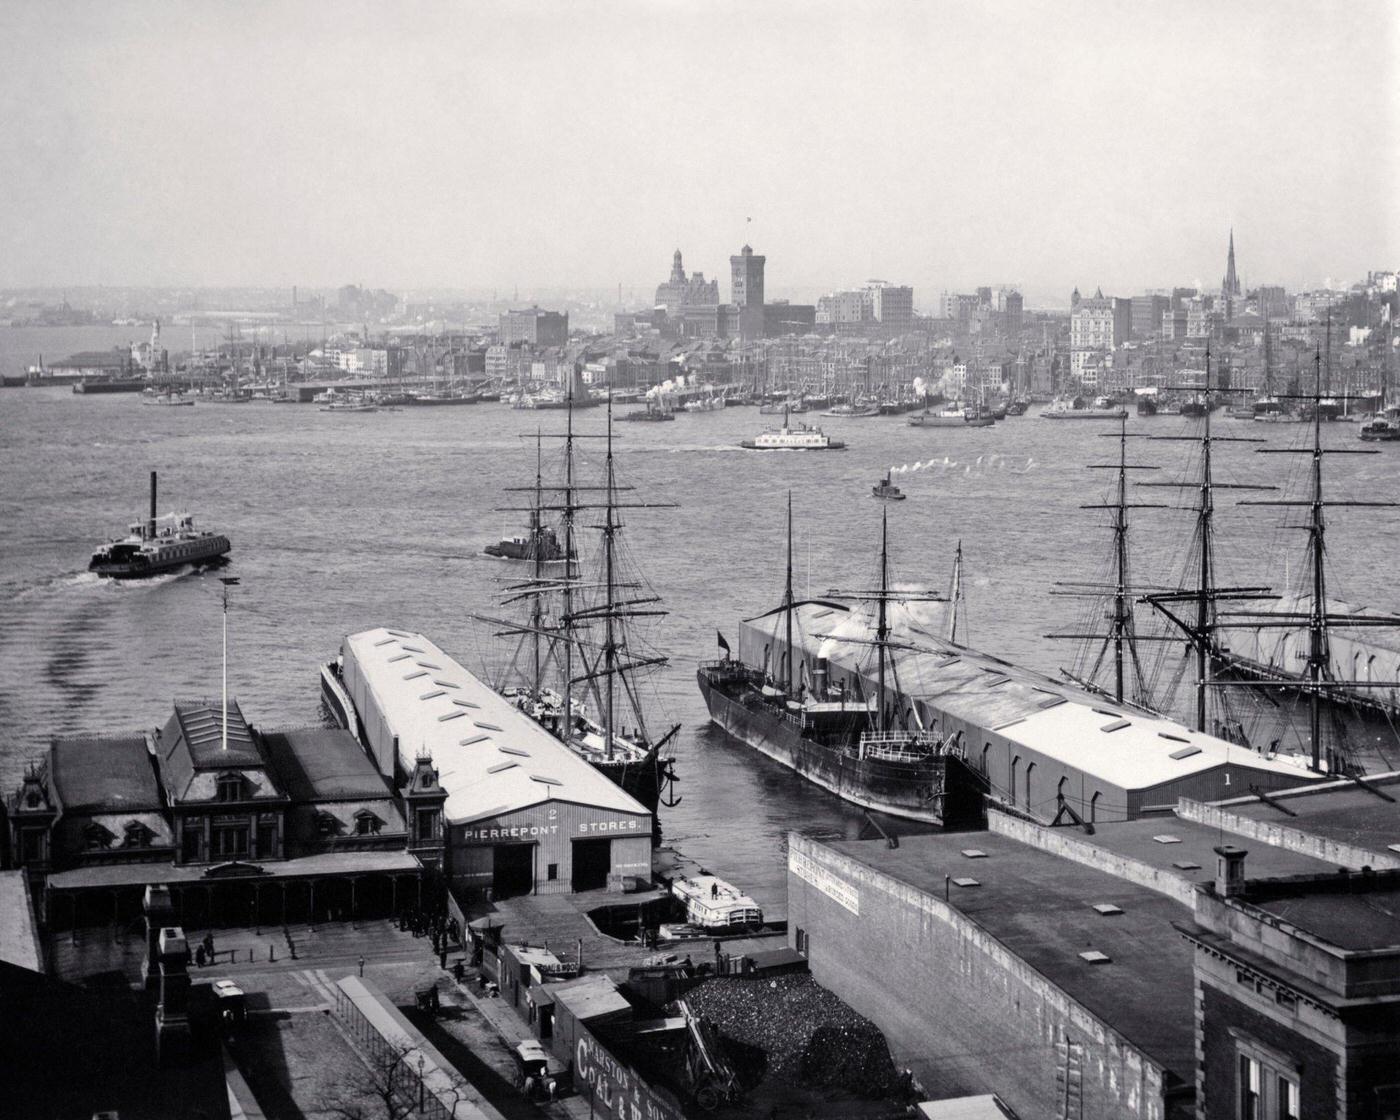 Downtown Manhattan Seen From Brooklyn Docks, East River Flowing Into New York Harbor, 1880